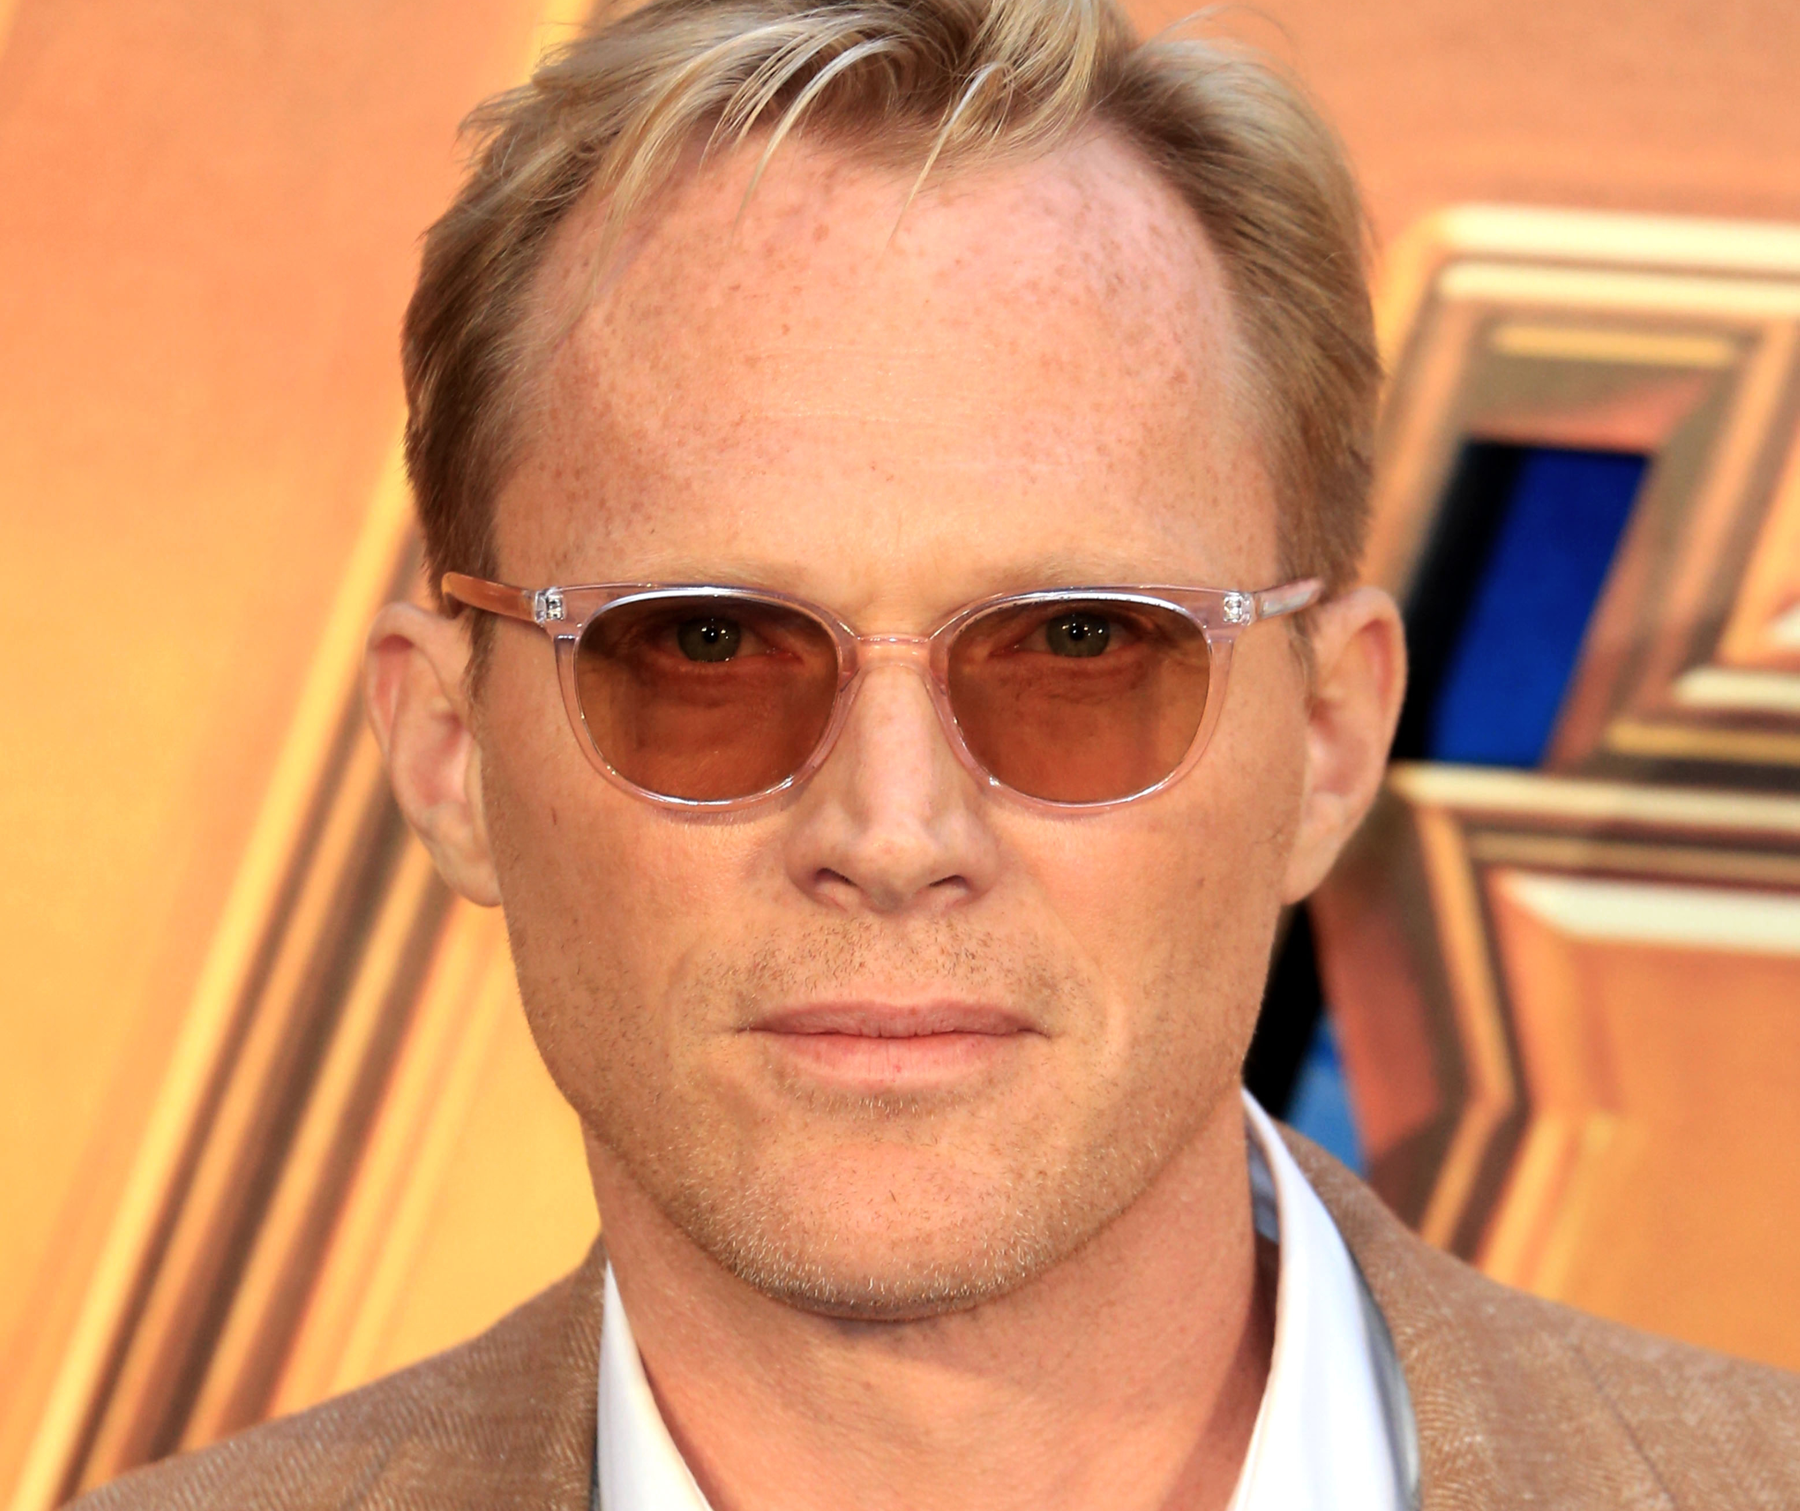 Paul Bettany on What You Can—and Can’t—Control as an Actor